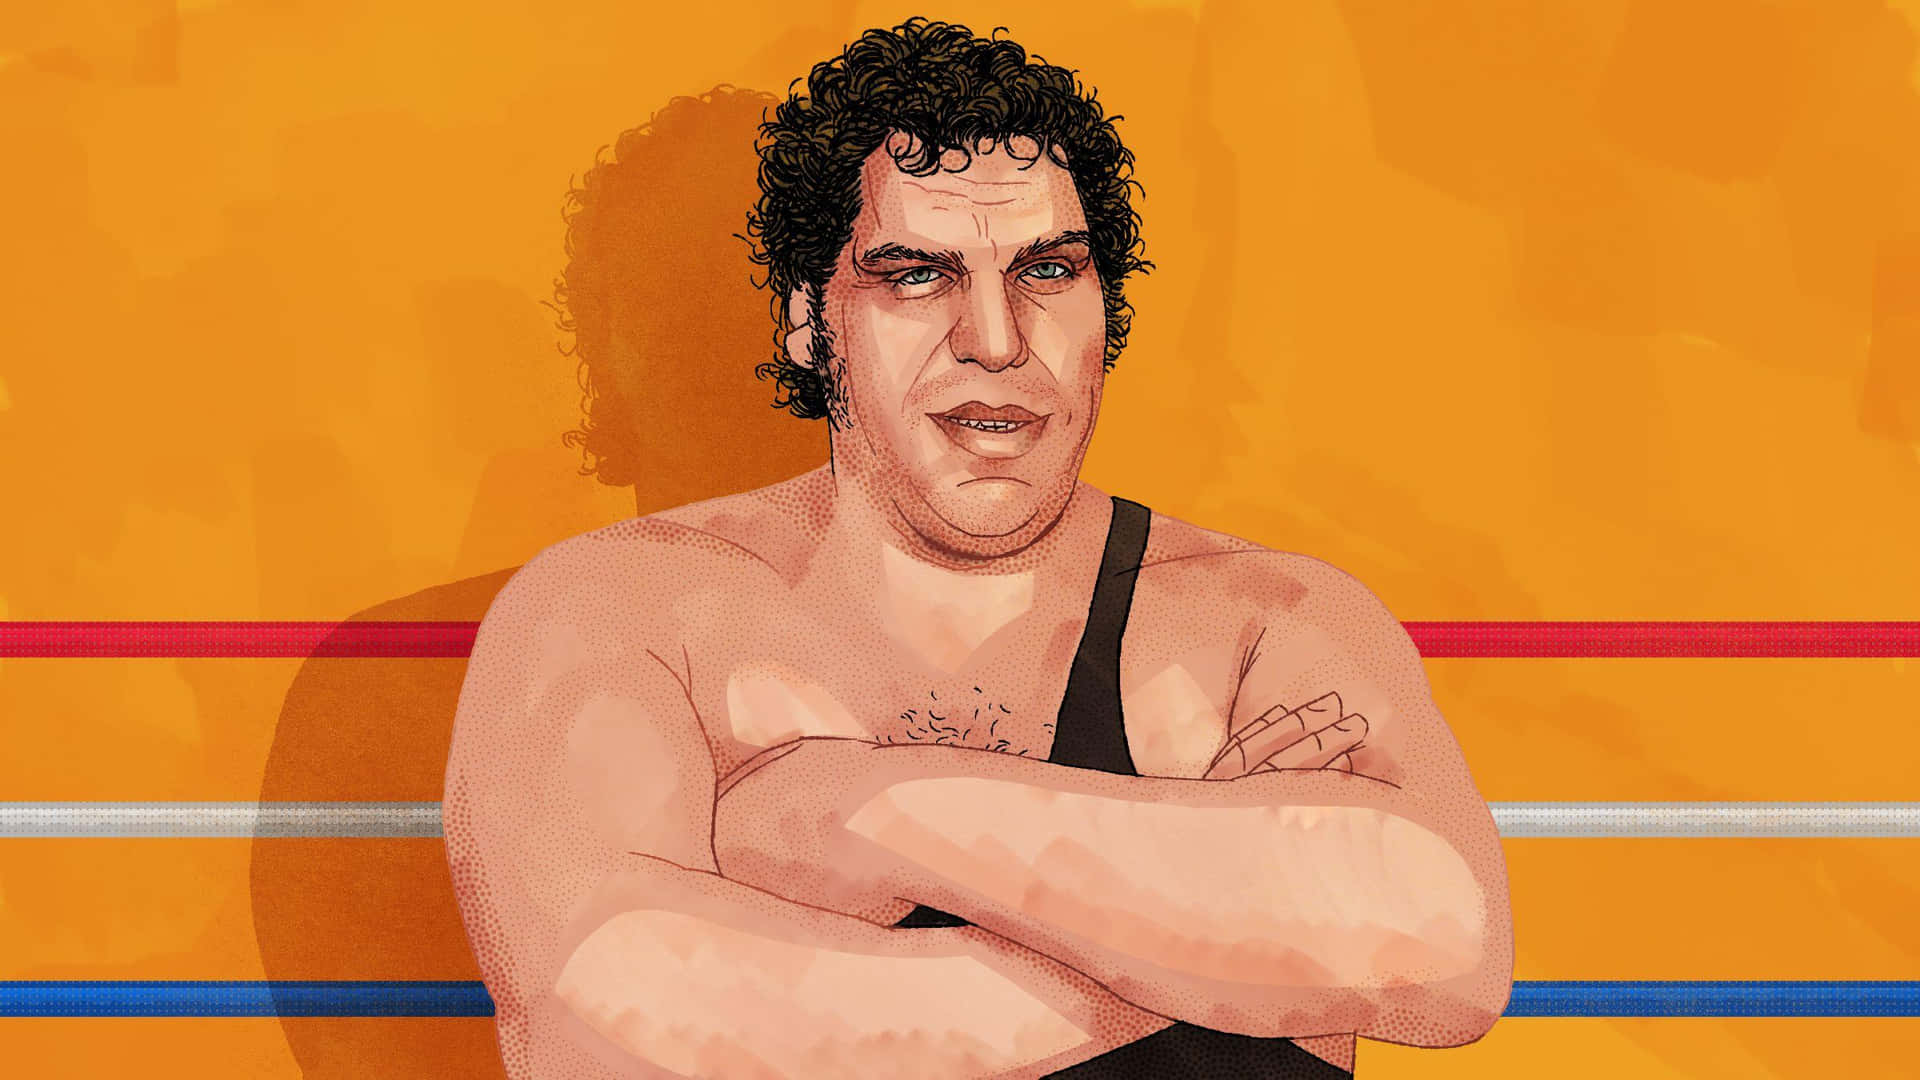 Andre The Giant Wallpaper